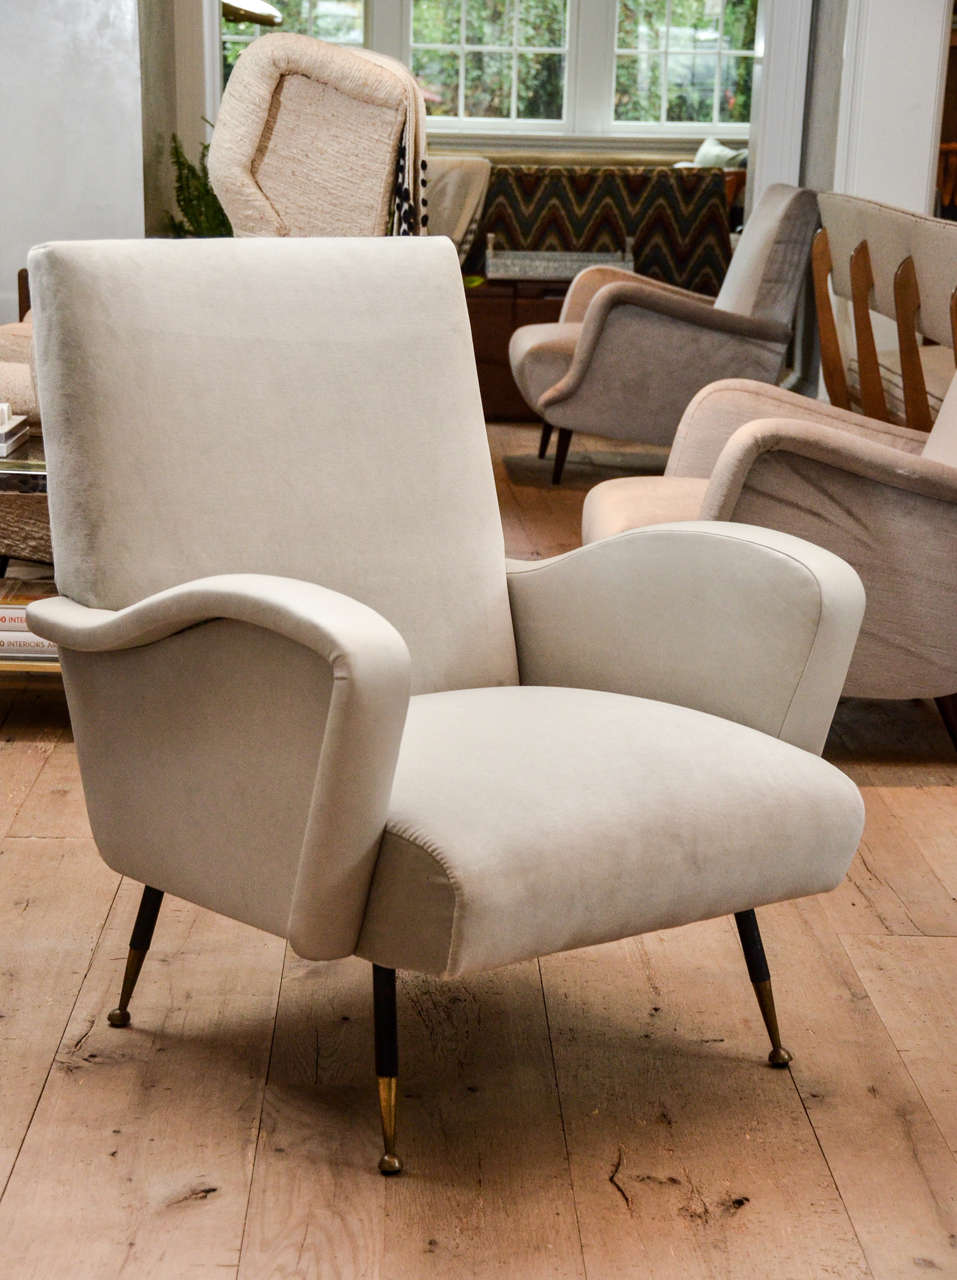 Beautiful pair of Italian Mid Century armchairs newly re-upholstered in grey velvet with leather armrest.